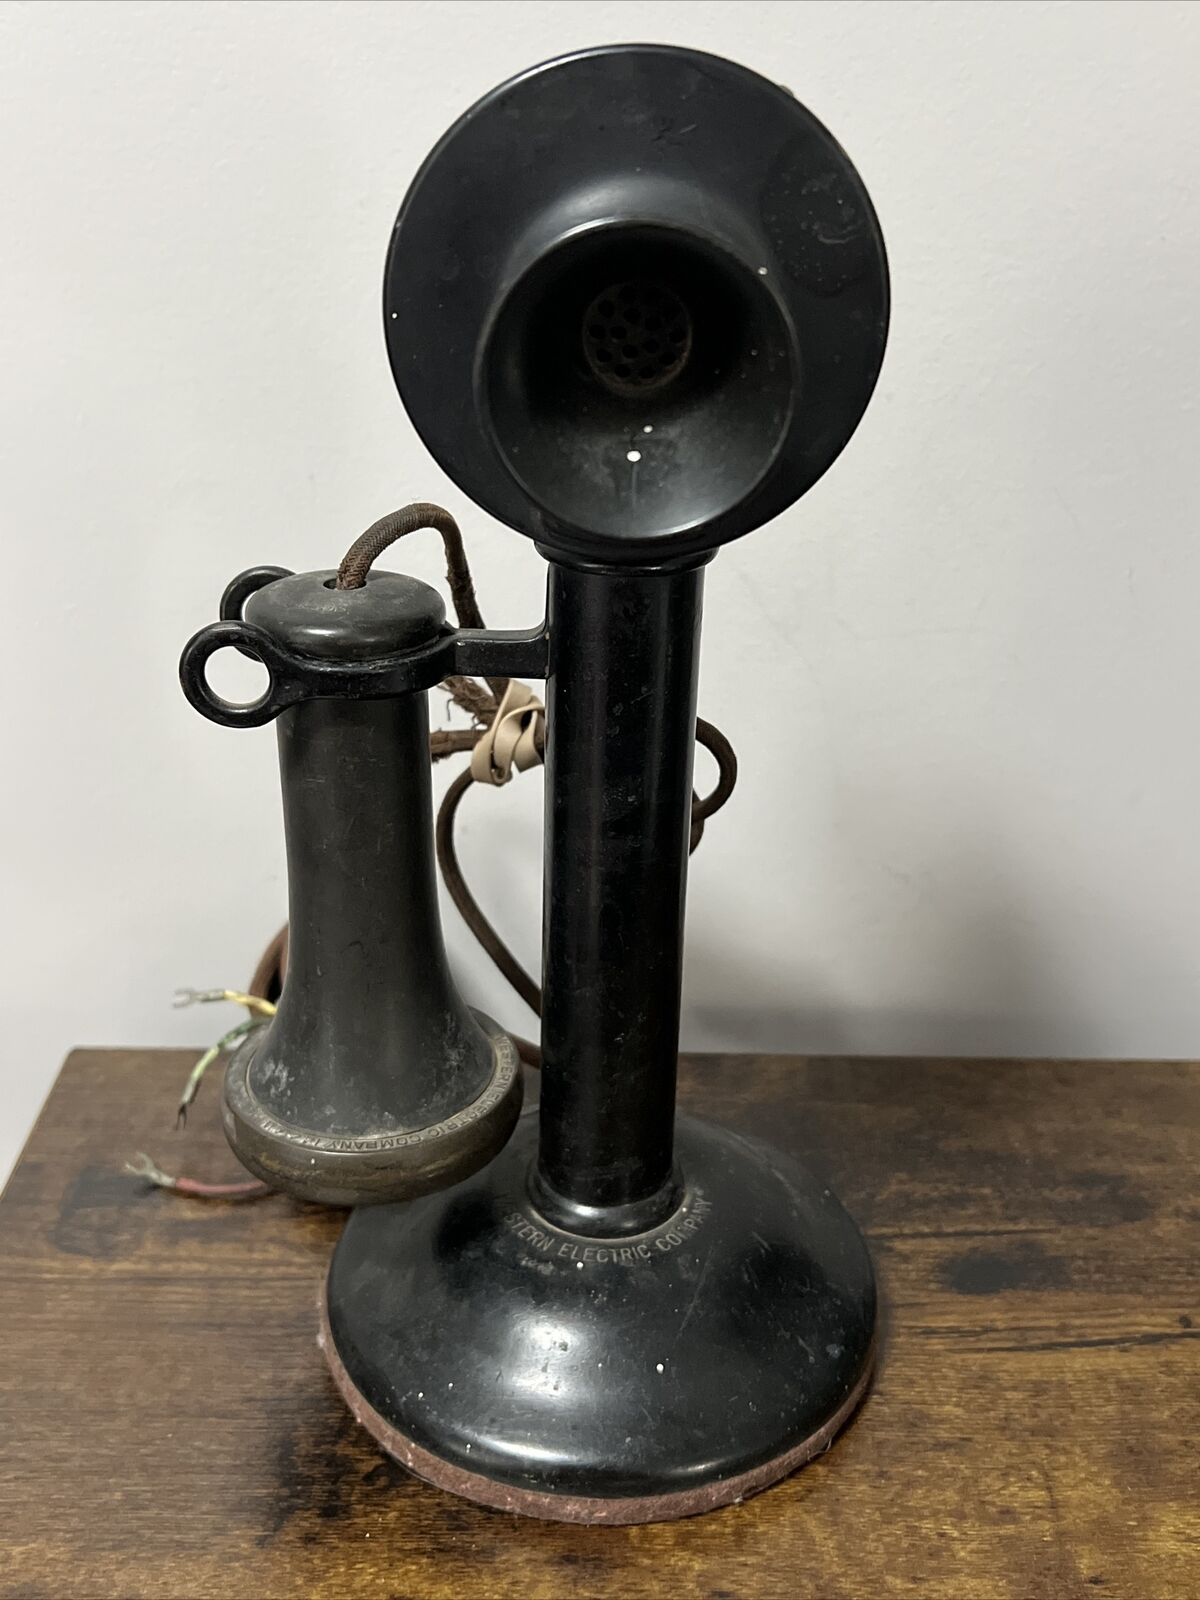 VTG Antique 1904 Western Electric Co. Candlestick Phone + 144 AW Receiver